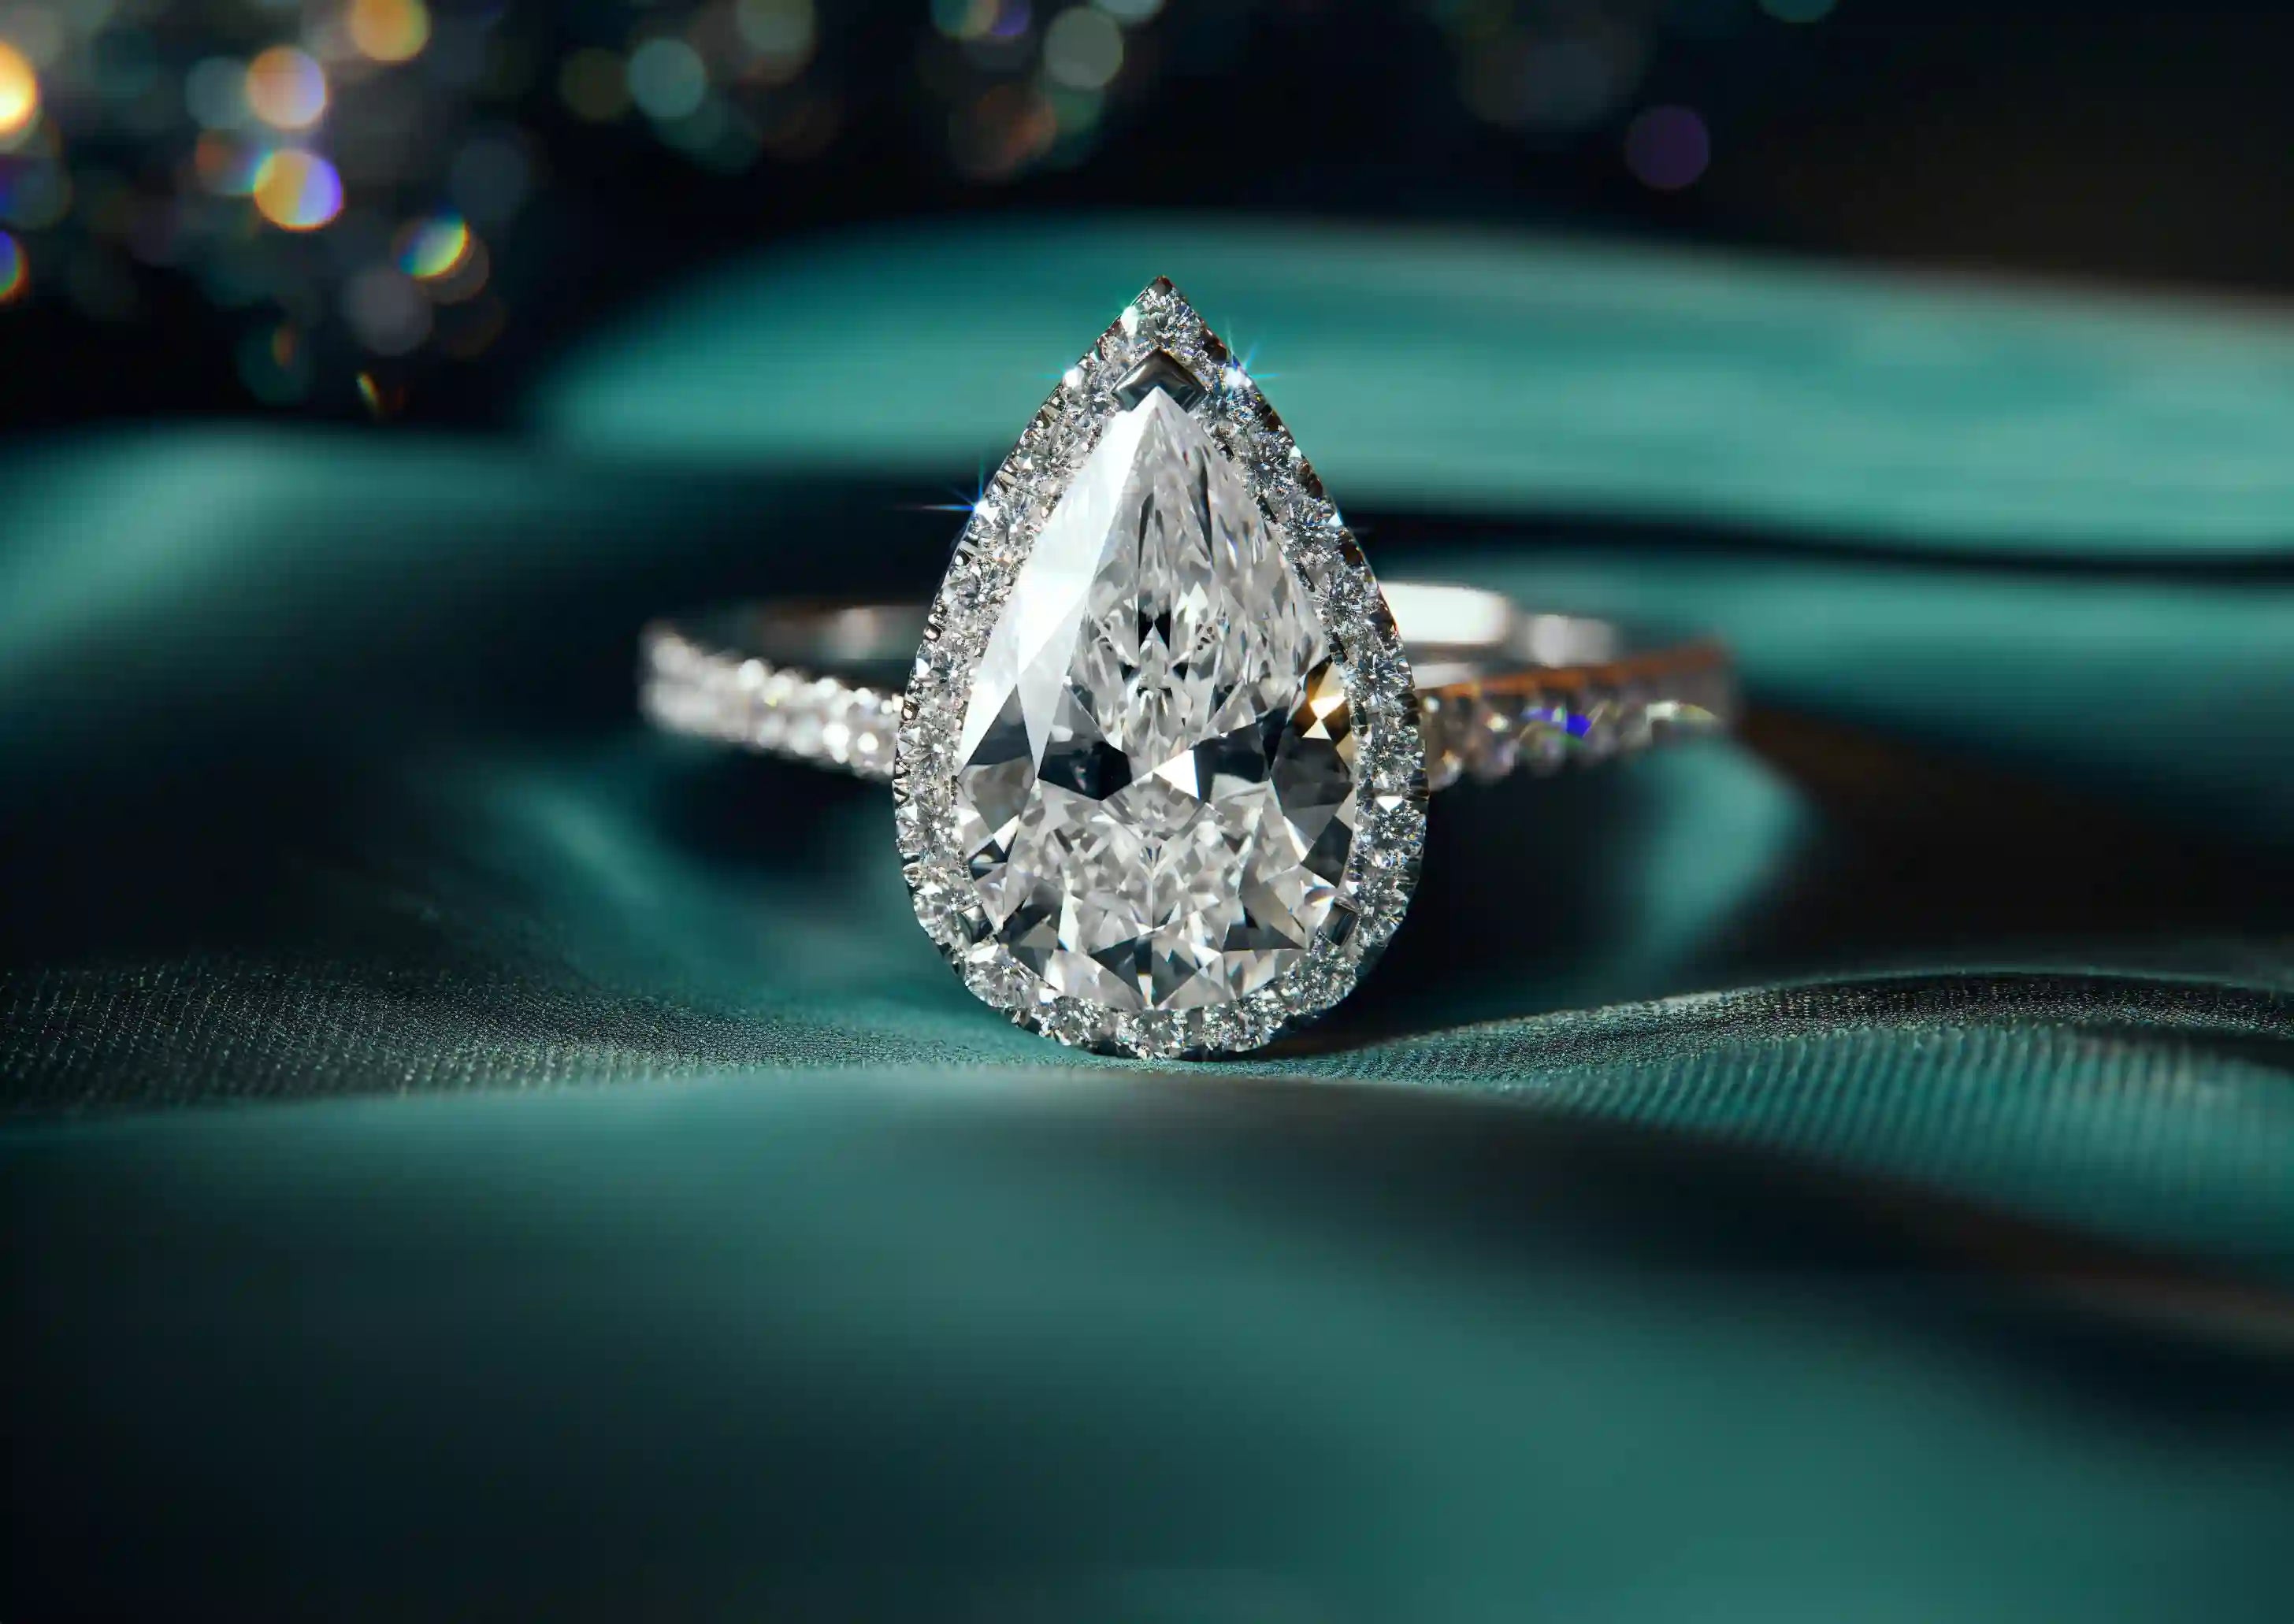 Pear-shaped diamond halo ring on teal fabric with colorful bokeh background.